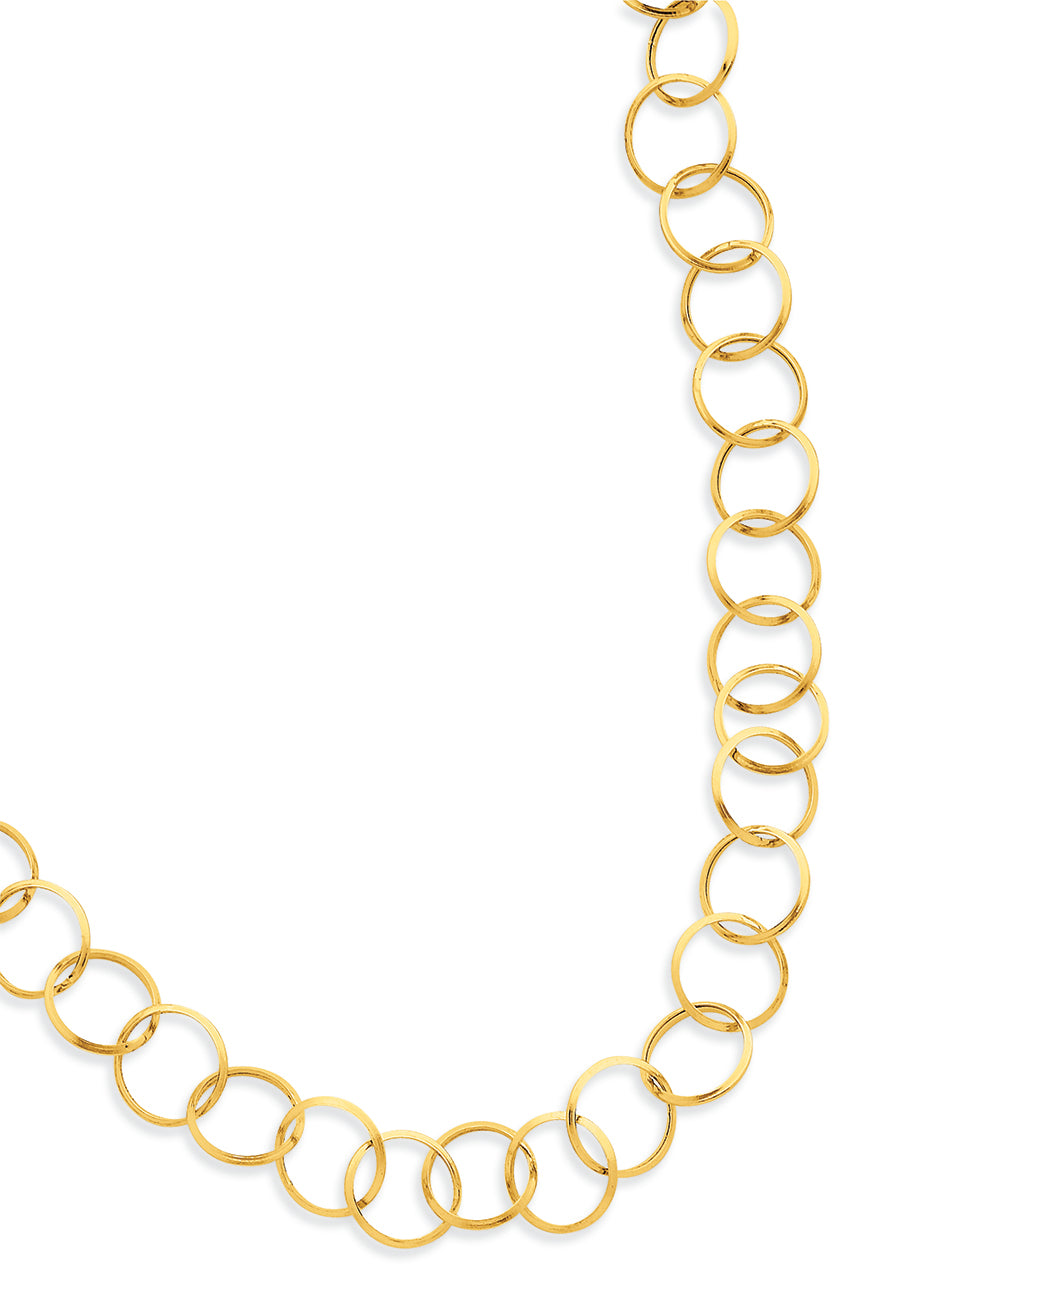 14K Gold Circle Chain Bracelet 7.5 Inches